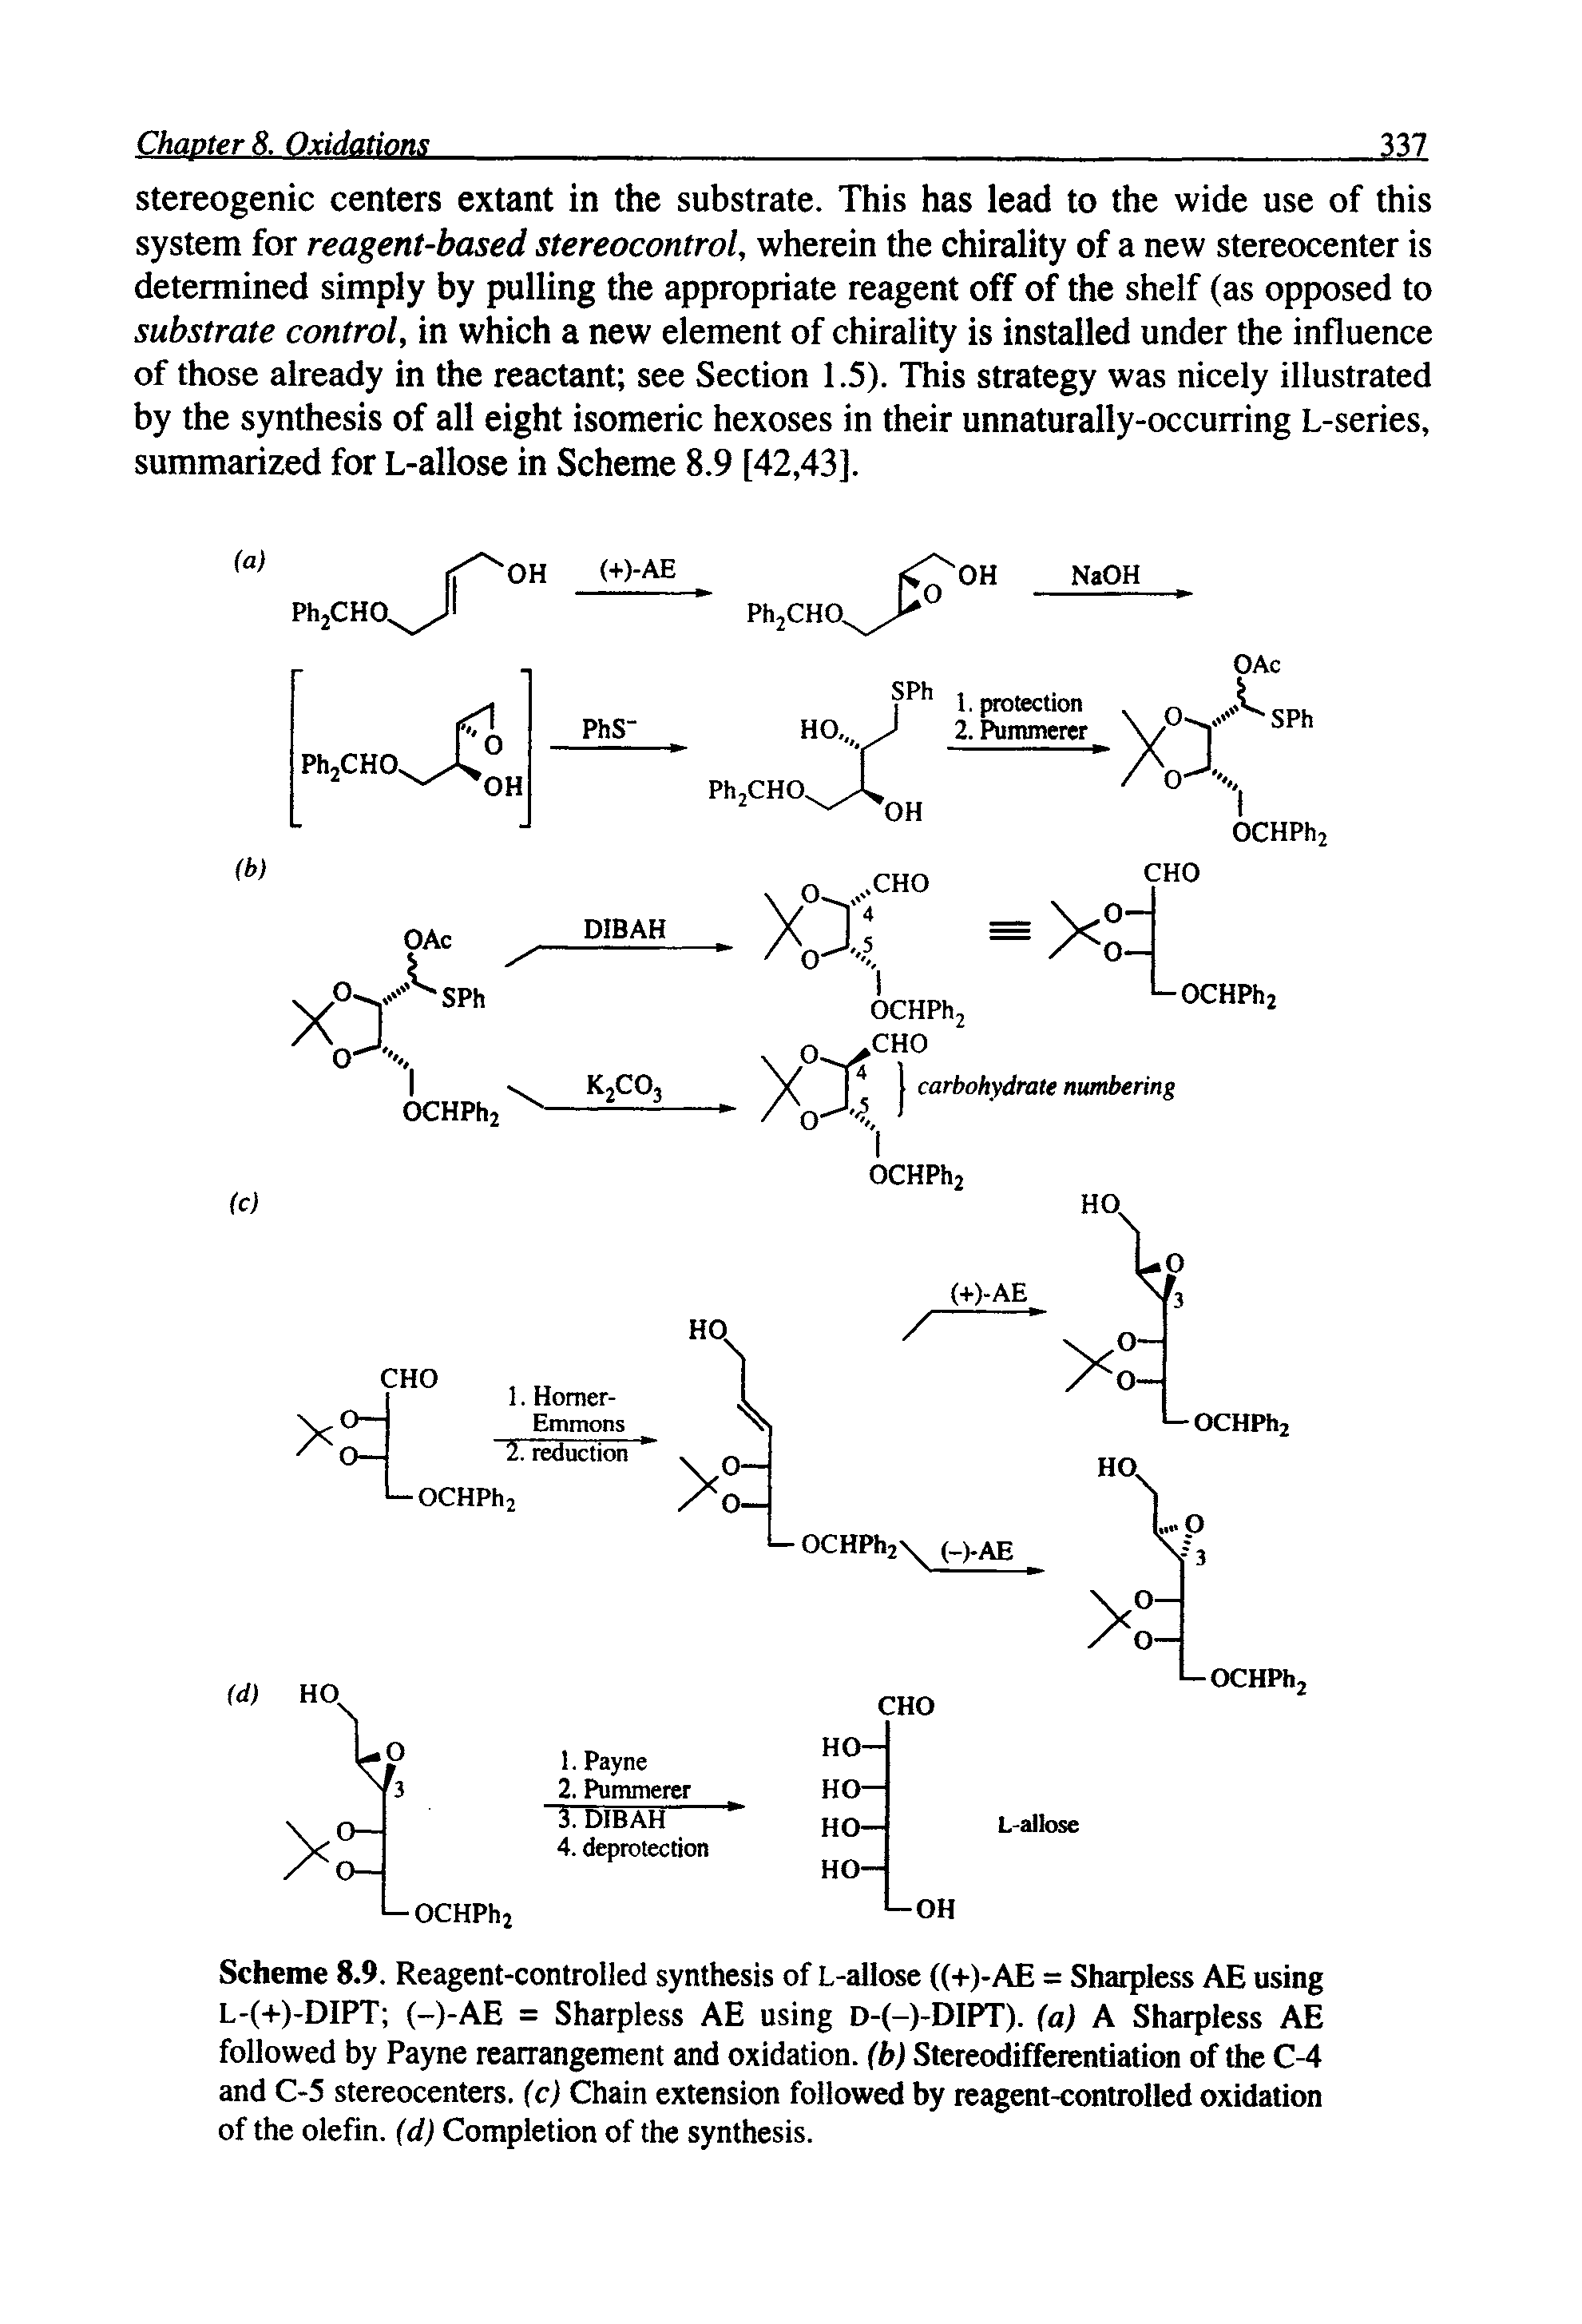 Scheme 8.9. Reagent-controlled synthesis of L-allose ((+)-AE = Sharpless AE using L-(+)-DIPT (-)-AE = Sharpless AE using d-(-)-DIPT). (a) A Sharpless AE followed by Payne rearrangement and oxidation, (b) Stereodifferentiation of the C-4 and C-5 stereocenters, (c) Chain extension followed by reagent-controlled oxidation of the olefin, (d) Completion of the synthesis.